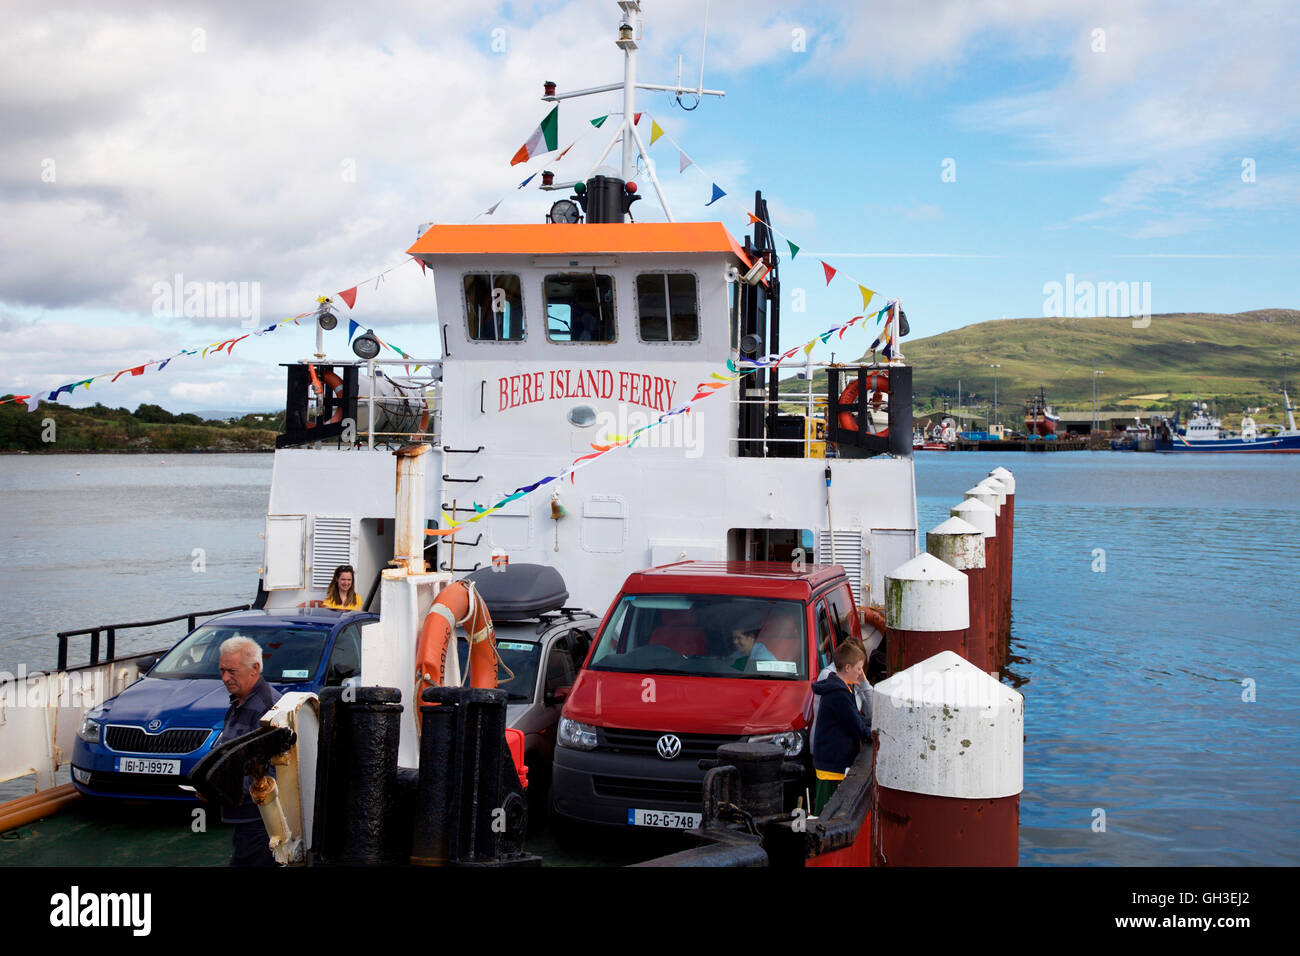 Bere Island Ferry angedockt in Castletownbere Stockfoto